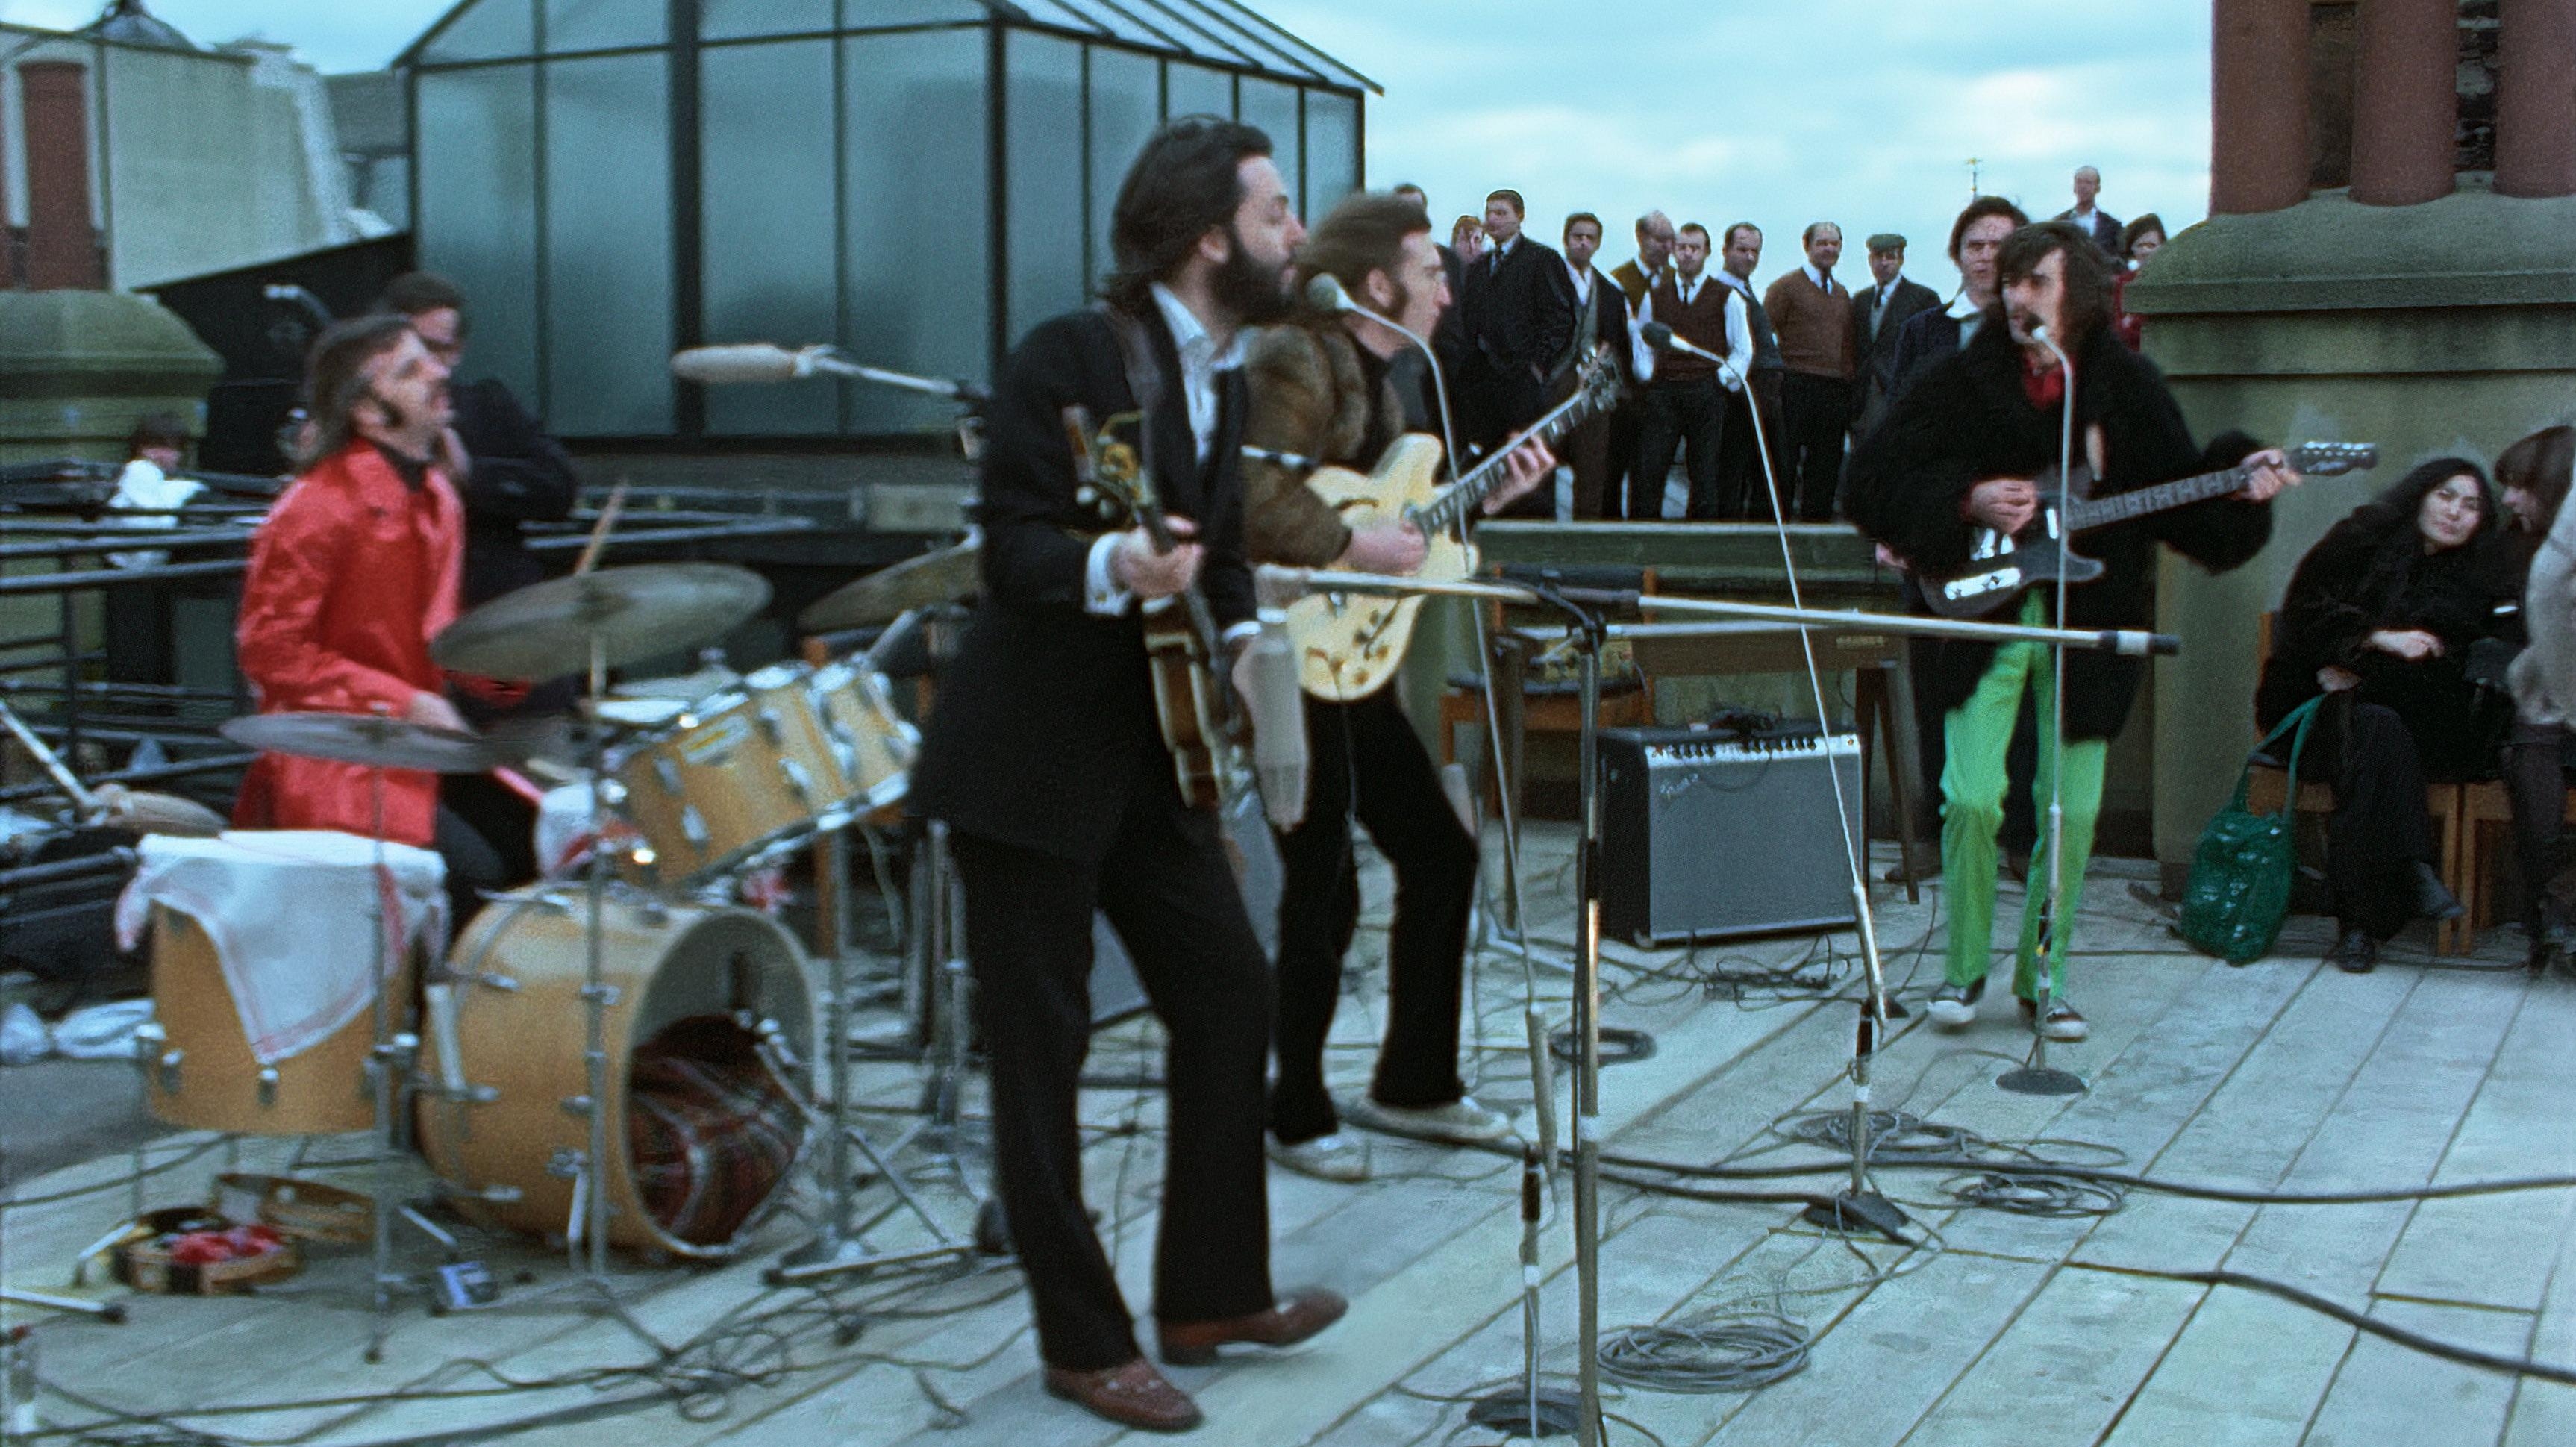 Peter Jackson lets his penchant for bloat infect the otherwise terrific The Beatles: Get Back